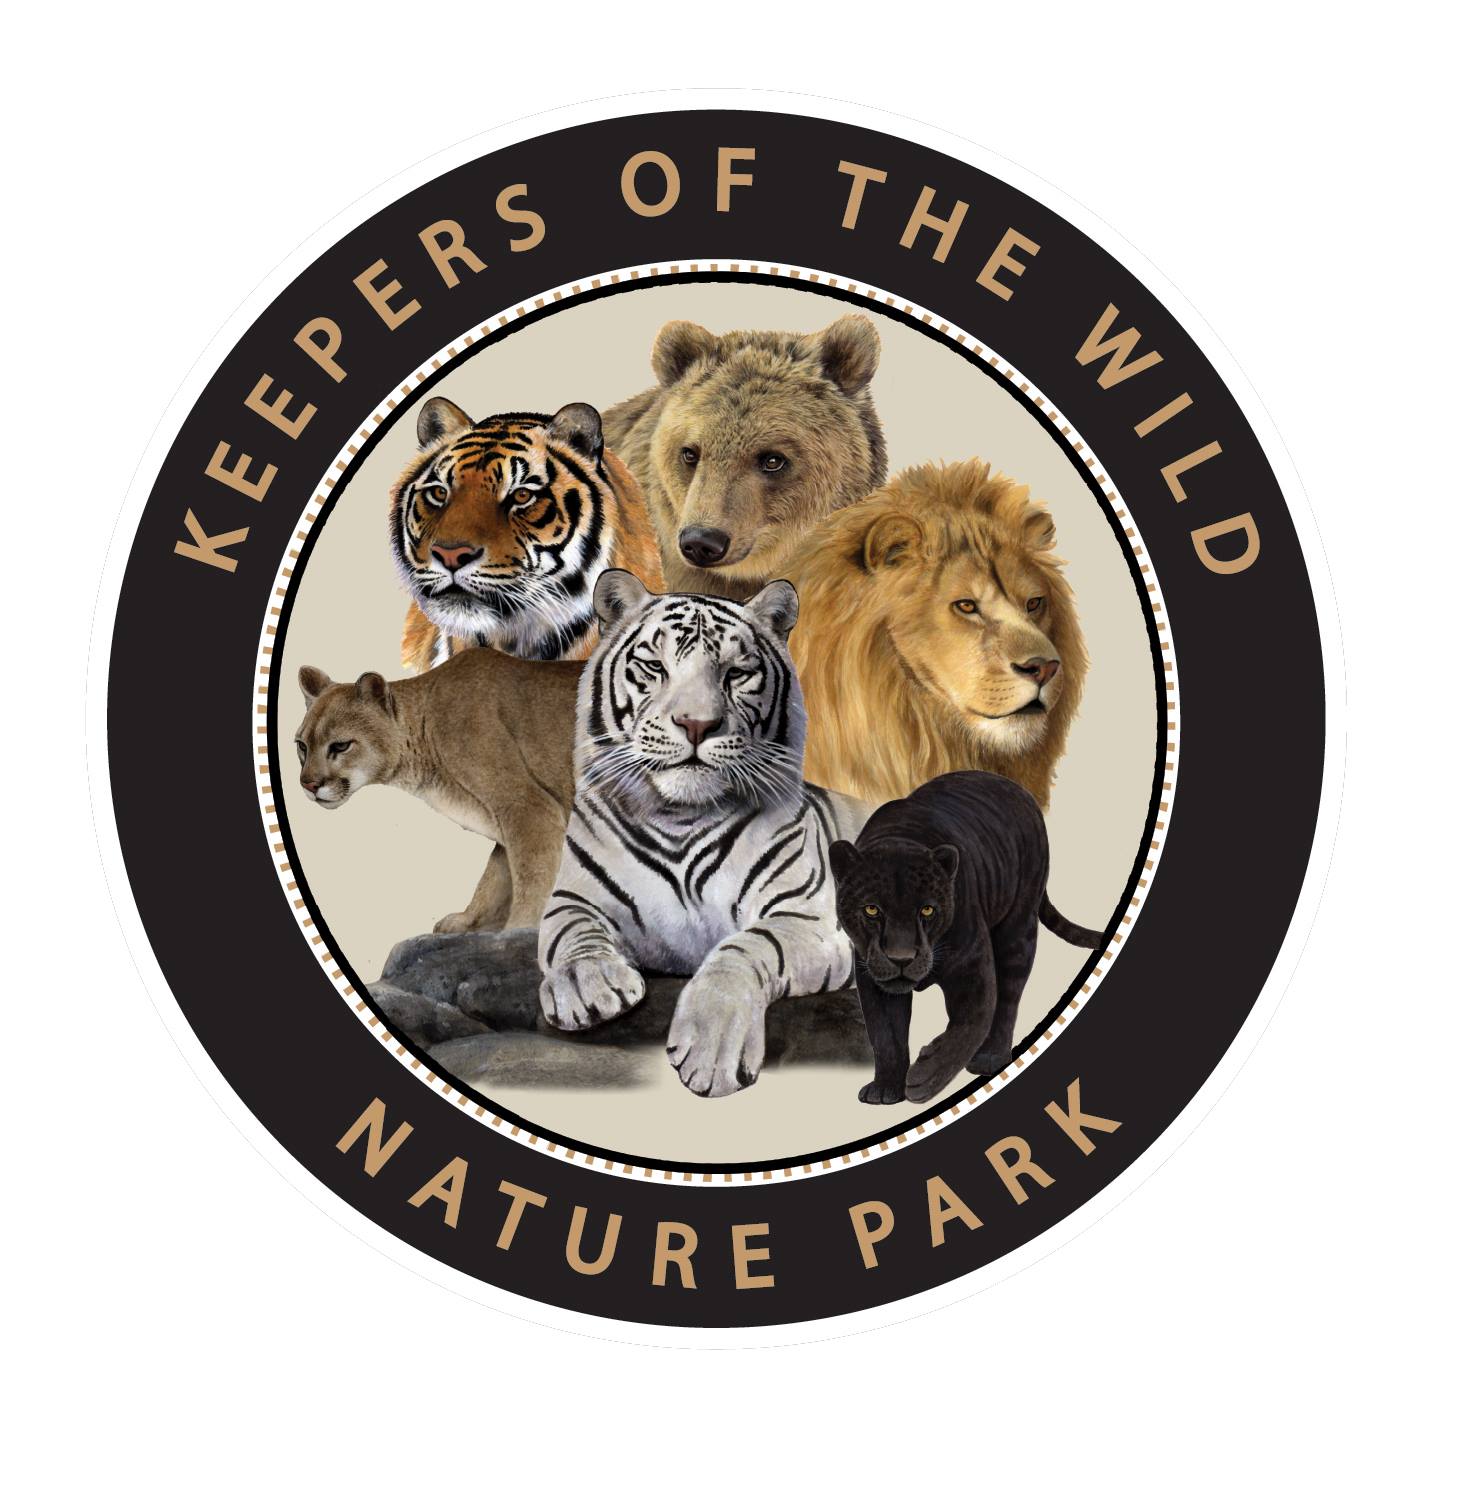 Keepers of the Wild Nature Park - Logo